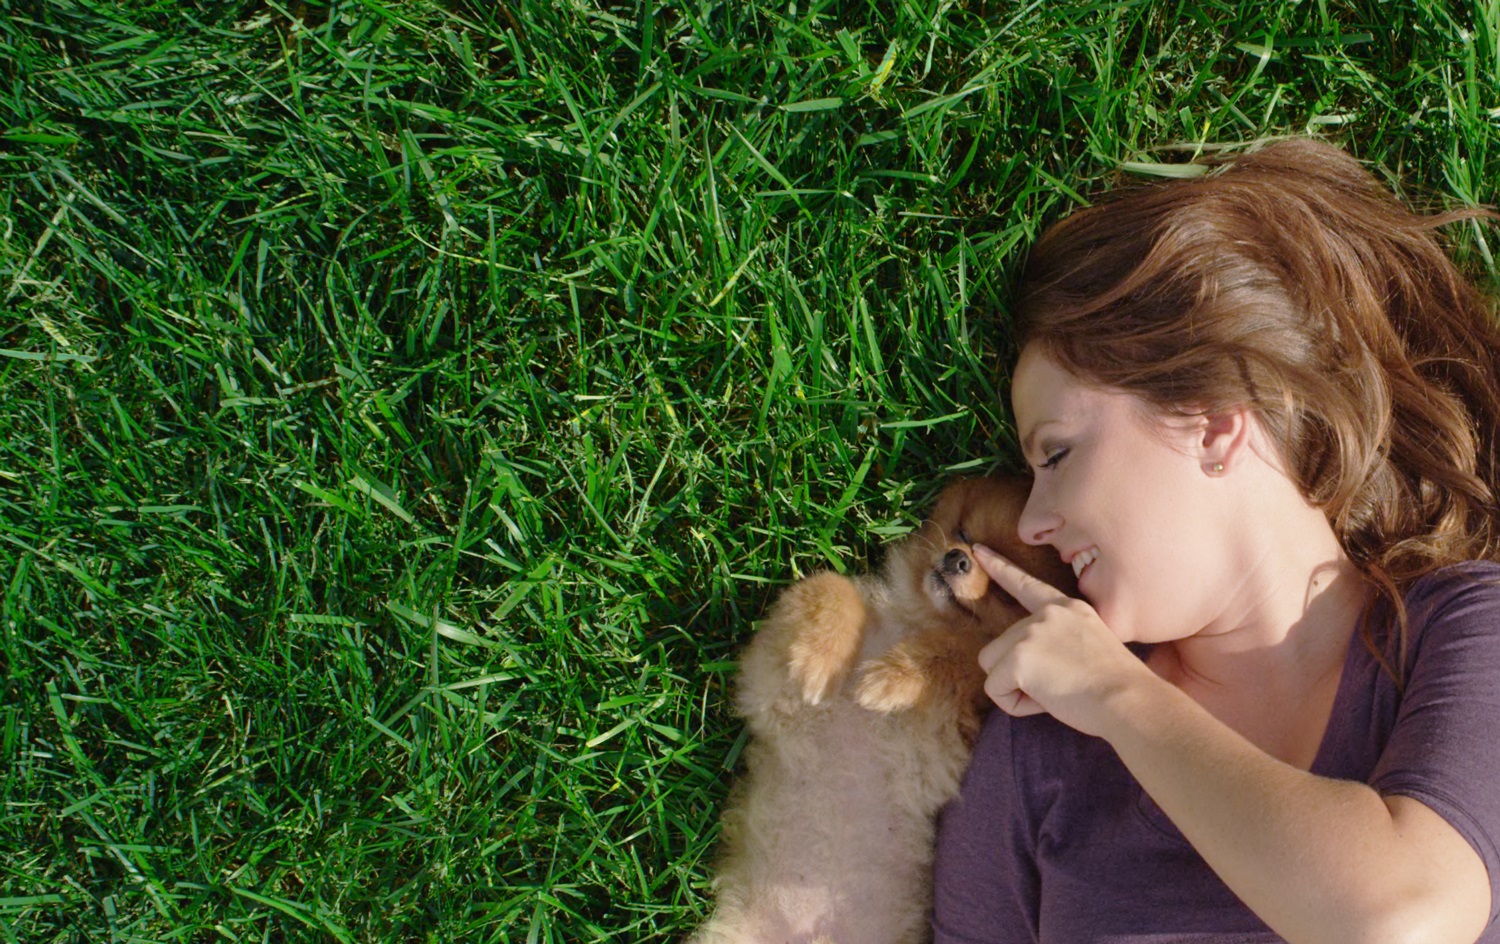 Pretty Woman playing with cute puppy on manicured green grass showing lawn care in Kyle